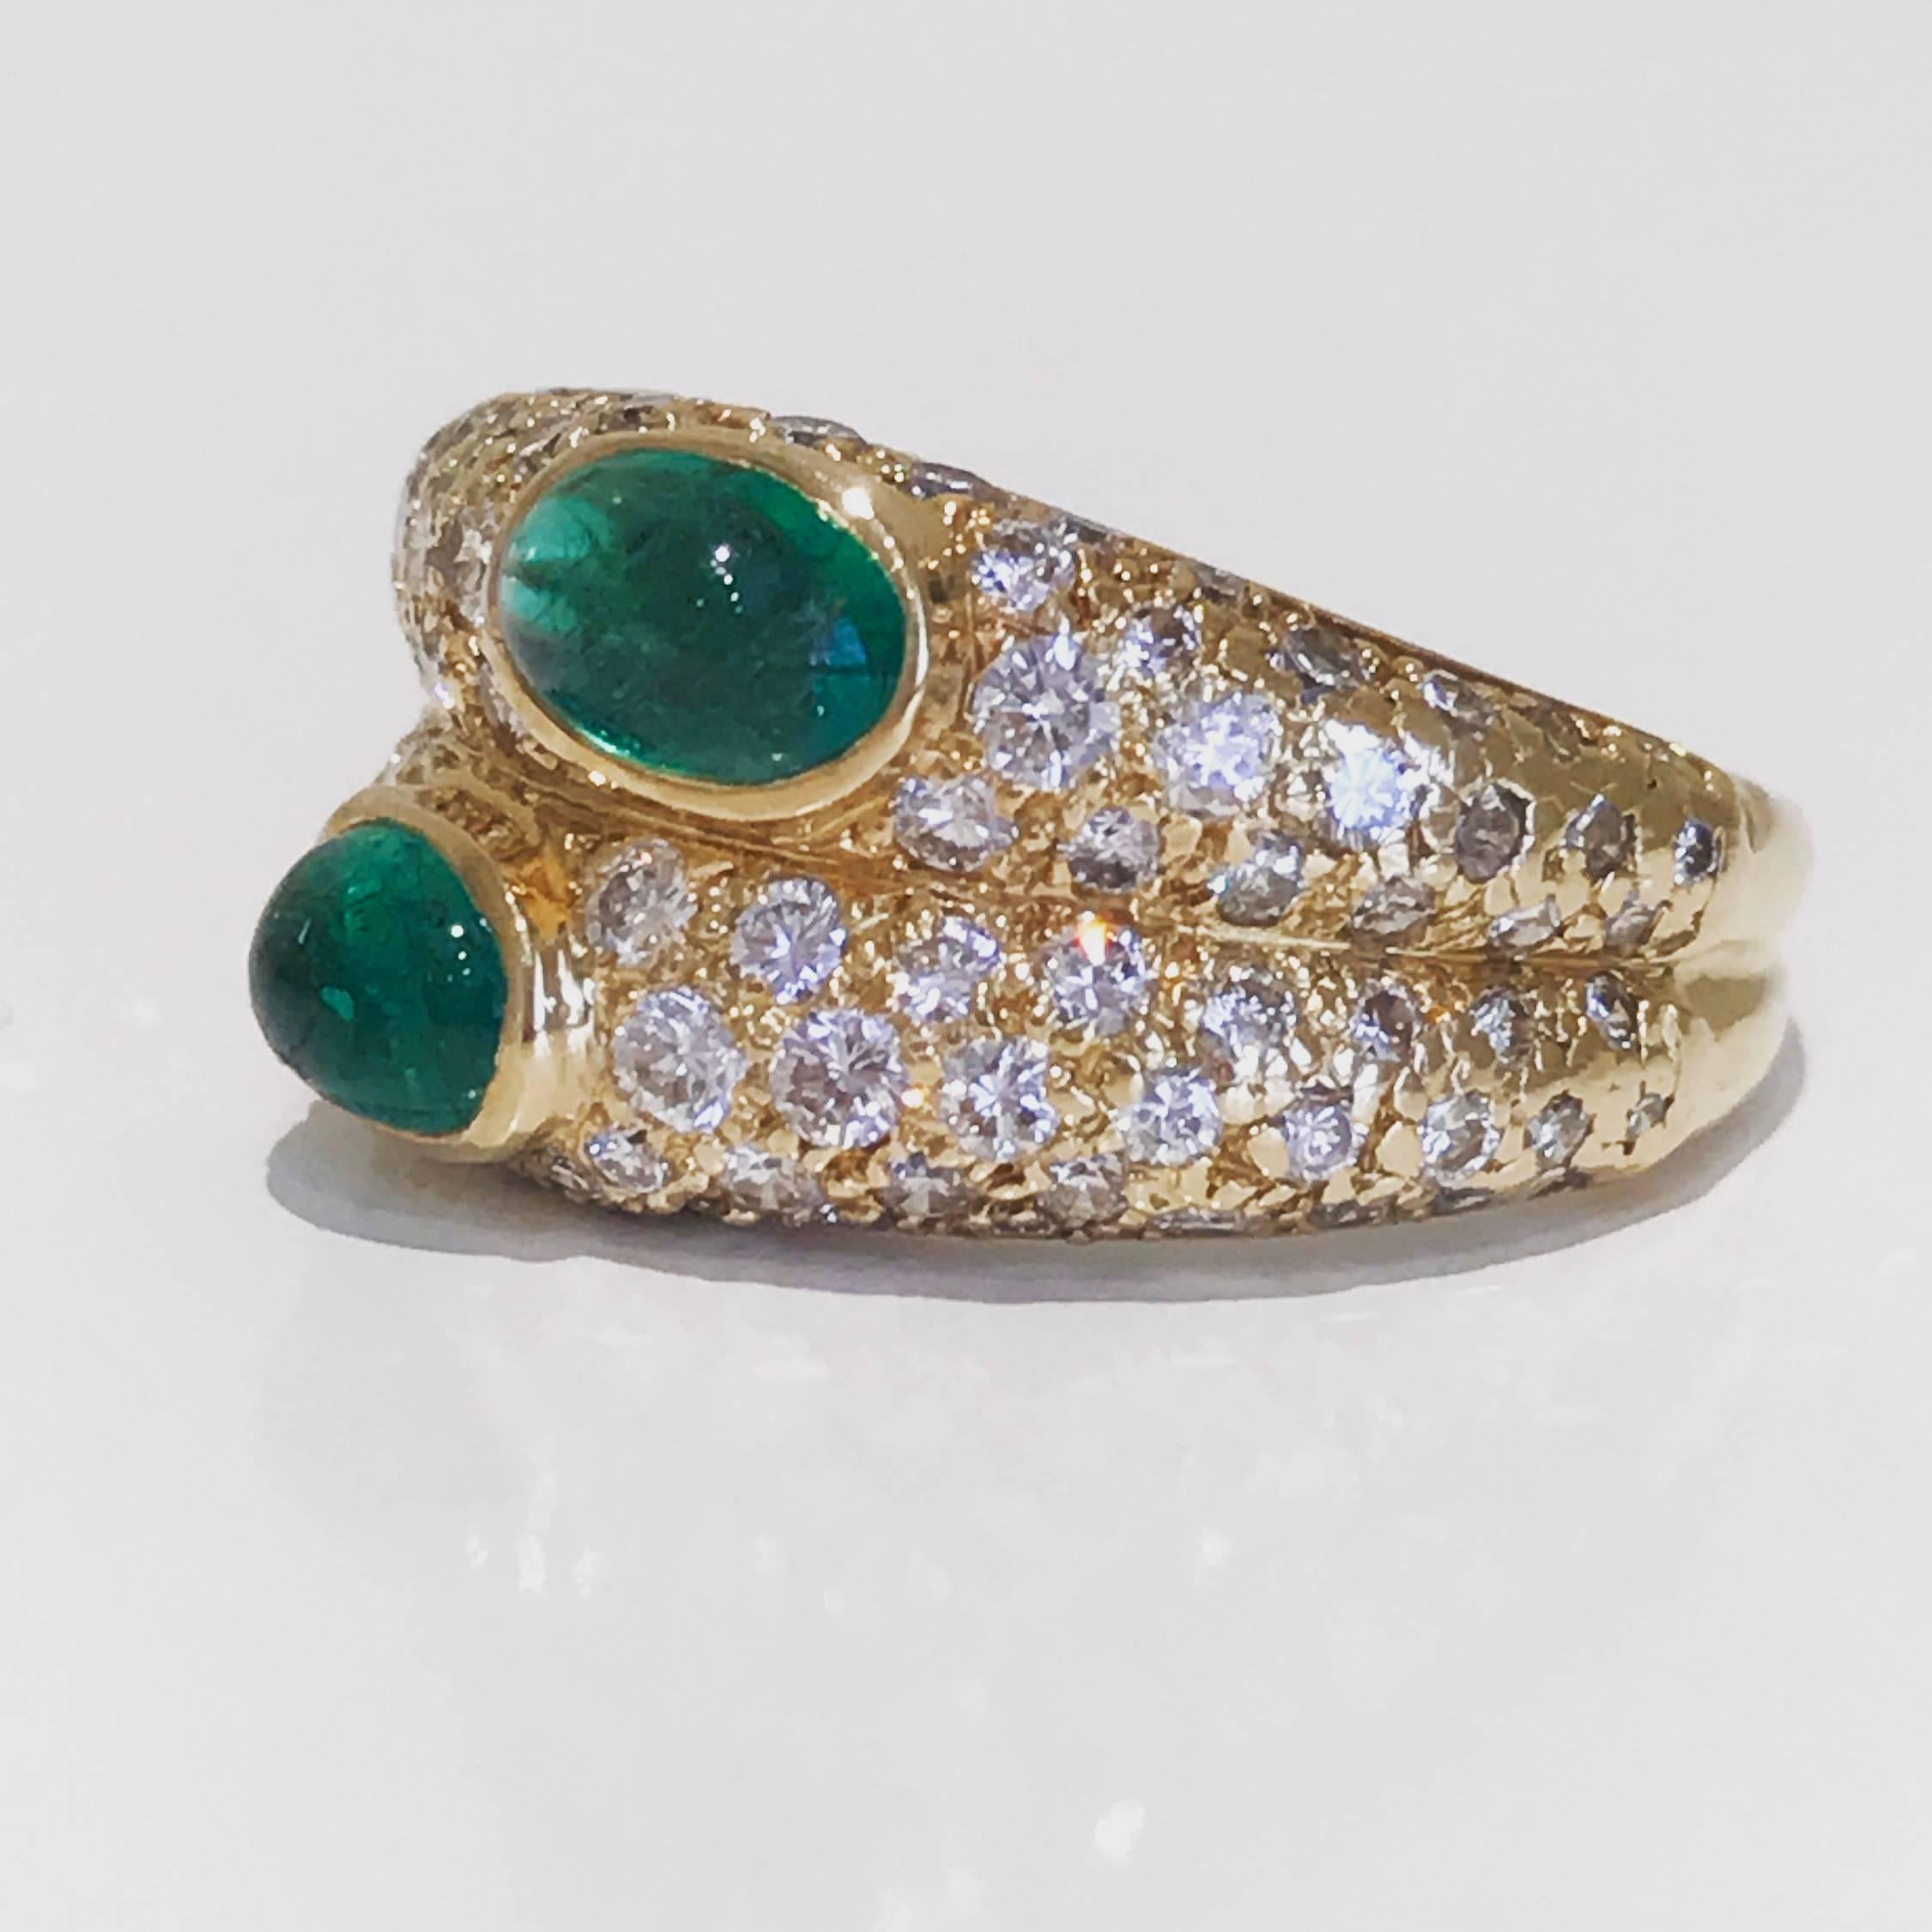 Vintage Cartier two cabochons emerald and diamond ring set in 18 karat yellow gold. The ring features seventy brilliant cut diamonds of approx 1 carat and emeralds of approx .60 carats
Colour: G
Clarity: VVS1 clarity 
Hallmarked Cartier 750, 636293.